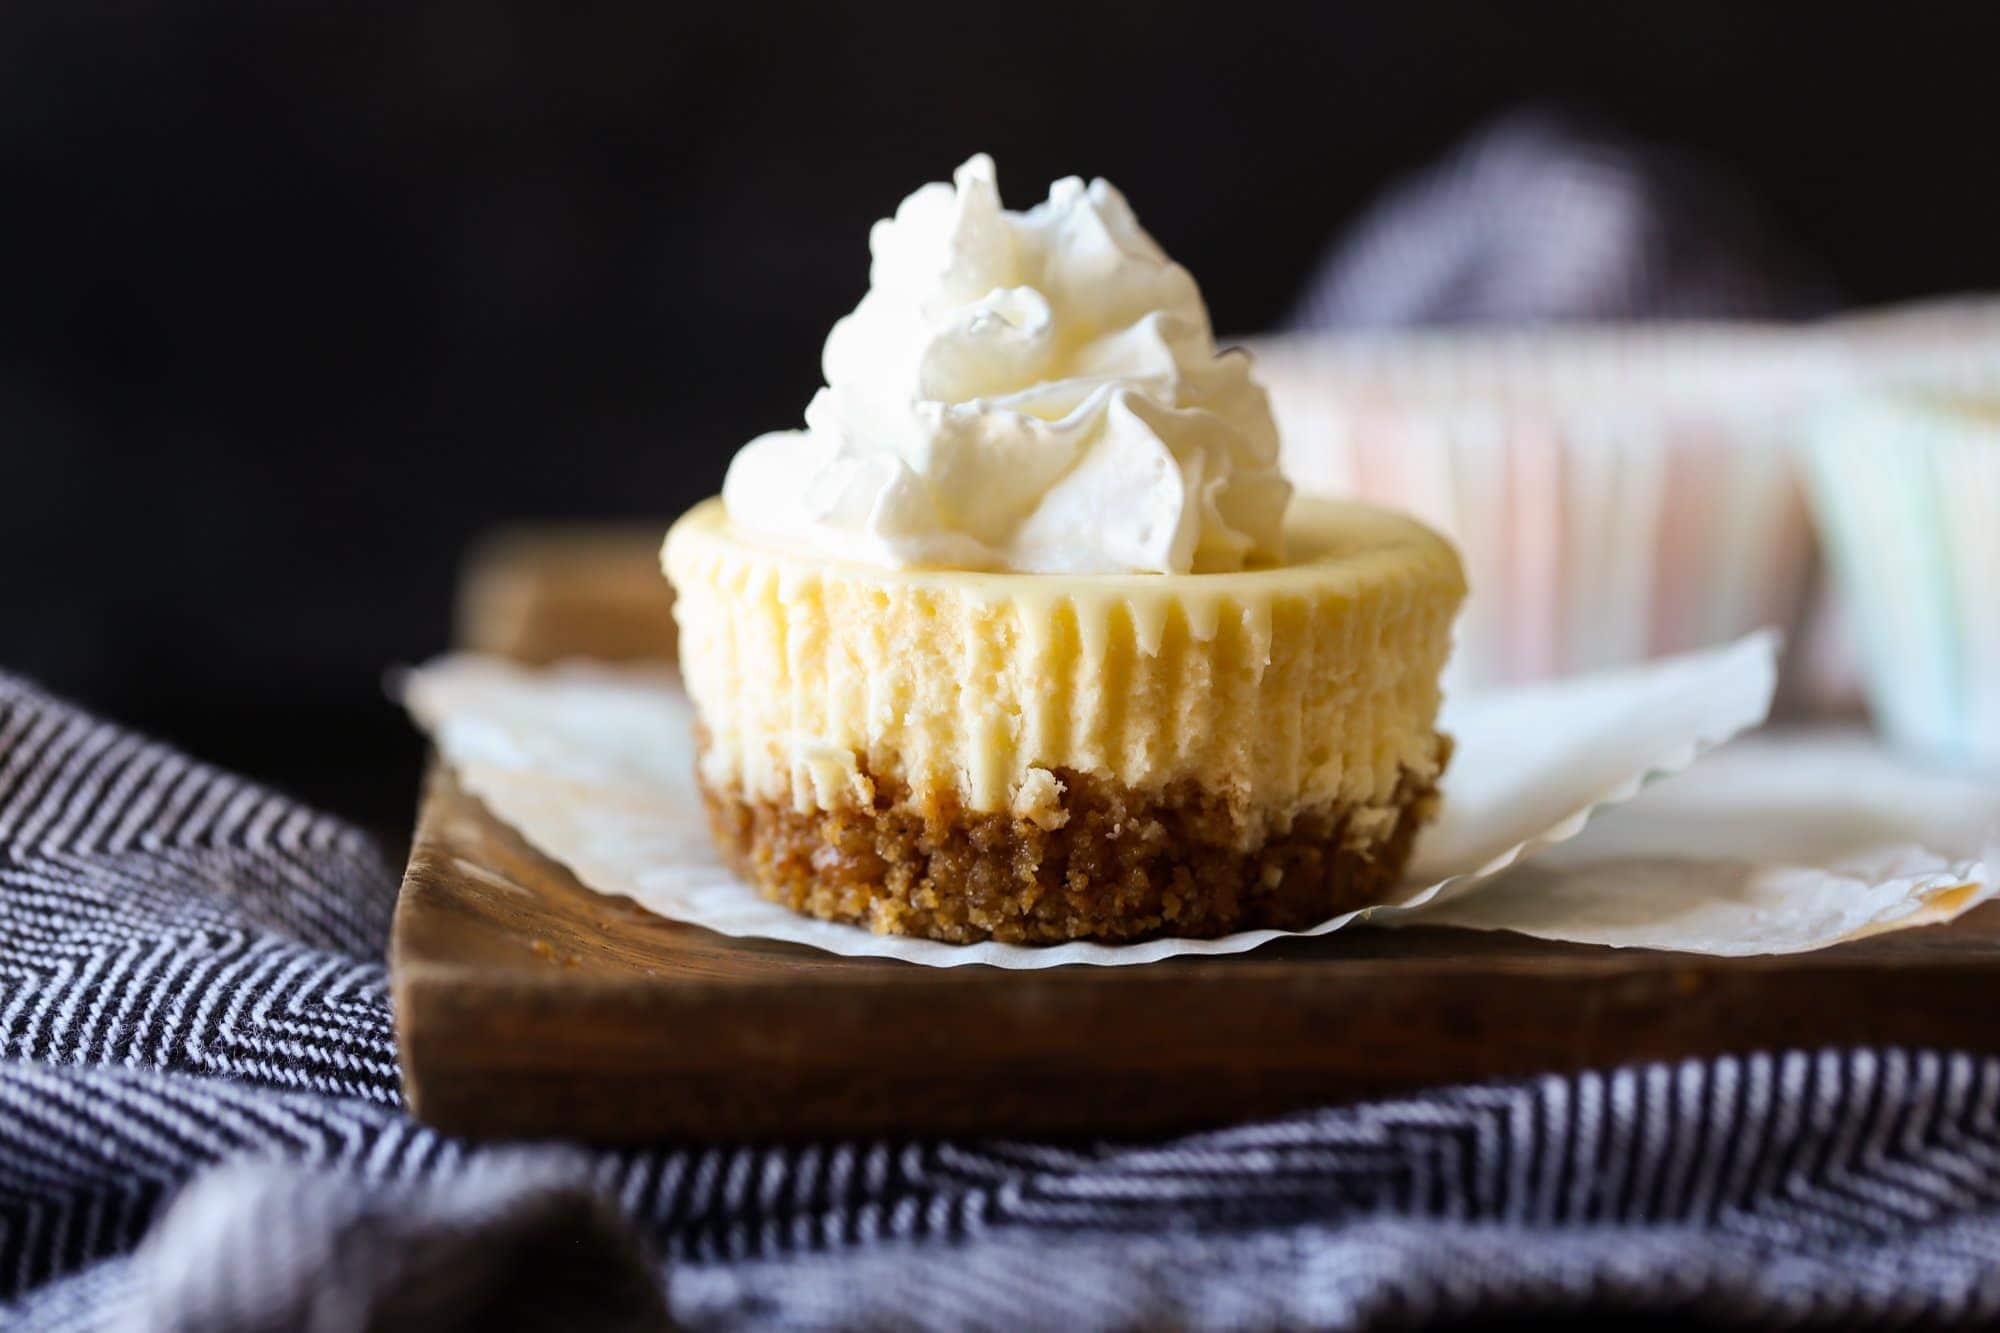 A mini cheesecake topped with whipped cream.